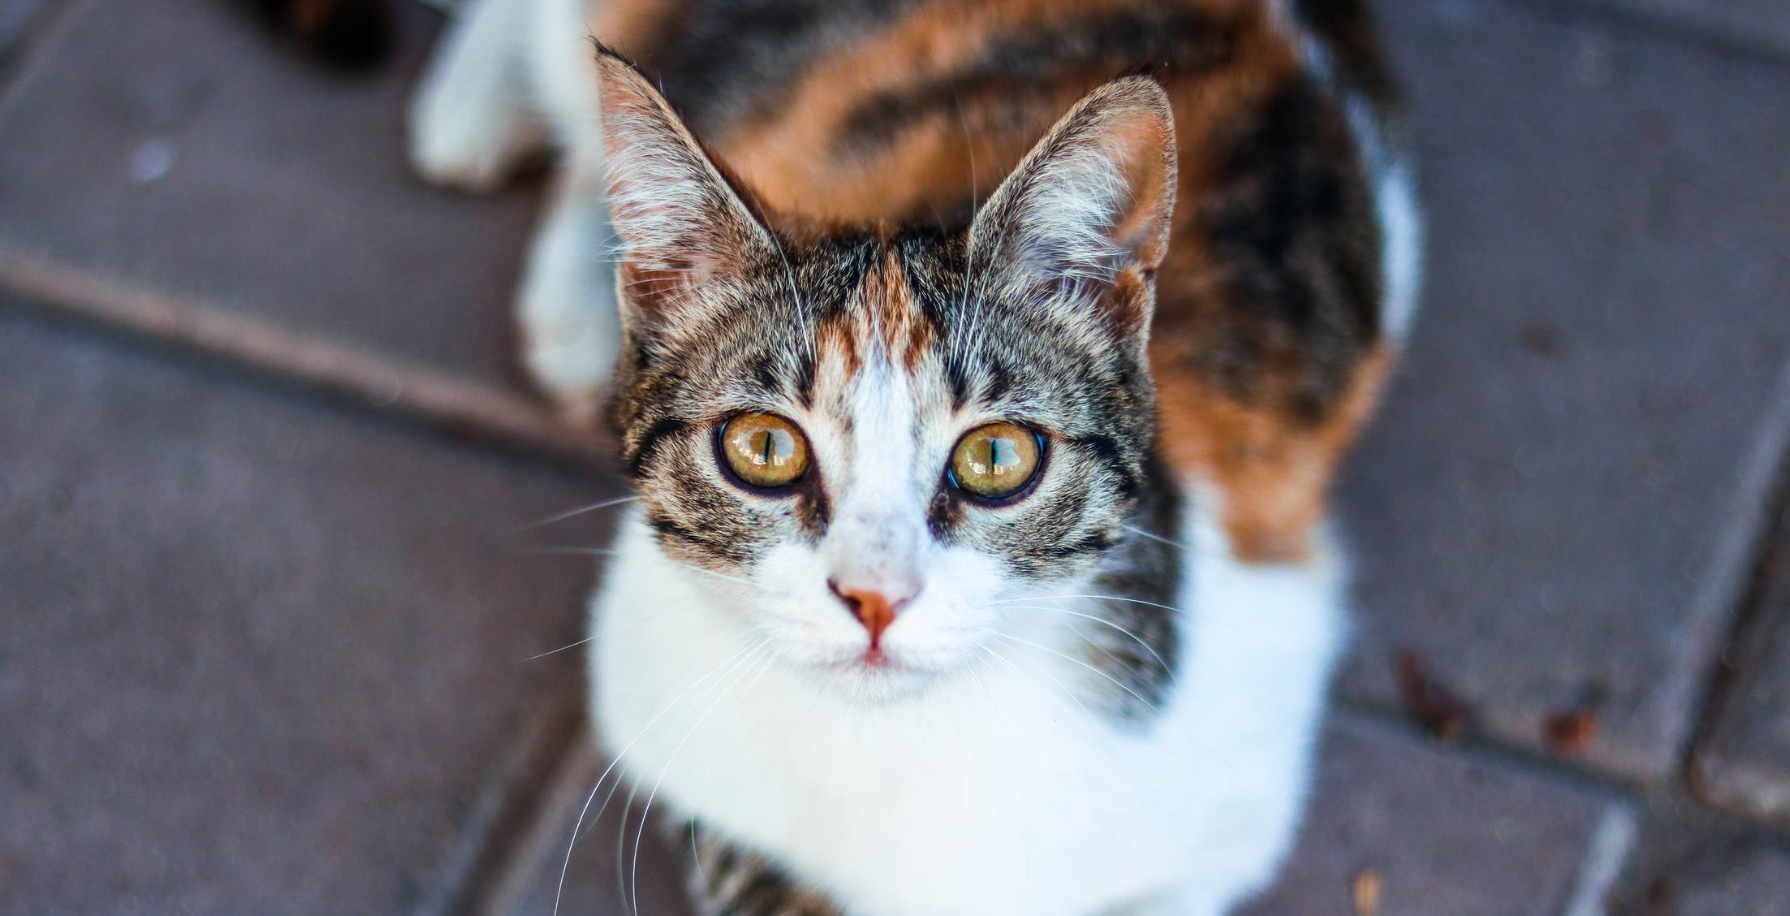 A calico cat with gray tabby stripes looking at the camera.